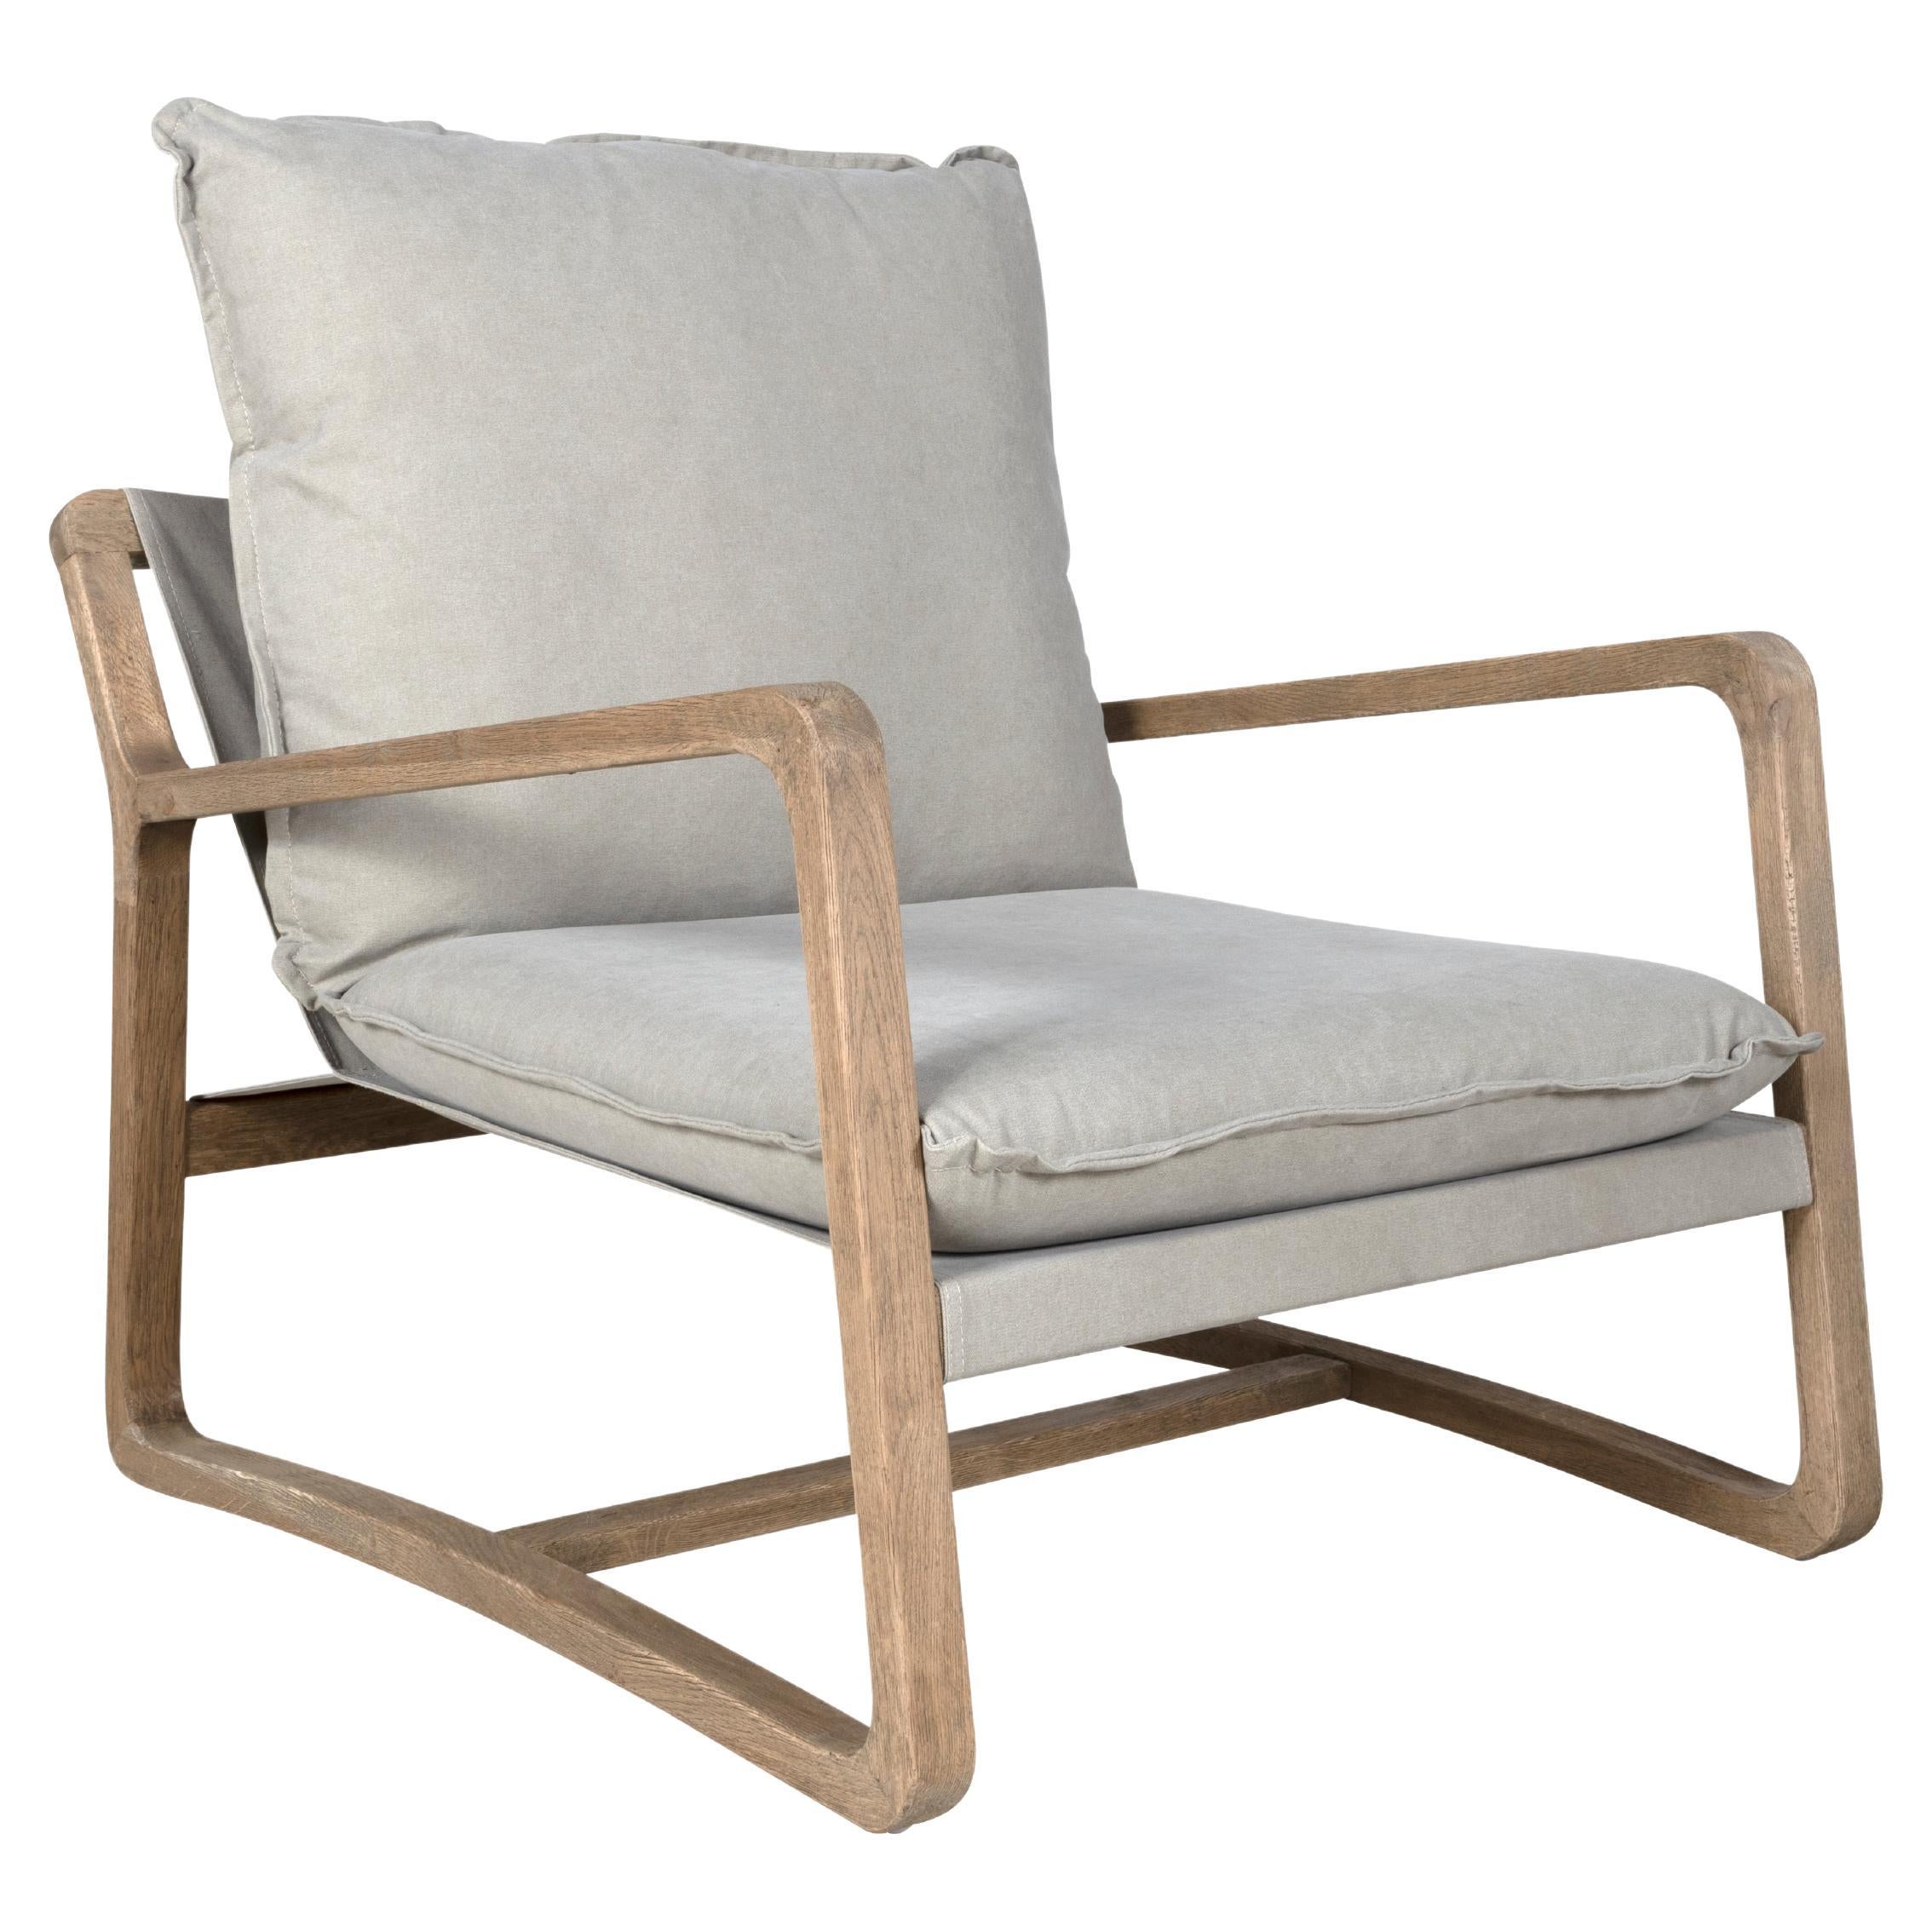 This gorgeous pair of gray sling-style canvas chairs are the perfect addition to your patio, terrace, or living room. The canvas sling offers a comfortable seat and the two cushions provide extra support for both you and your guests. This vintage